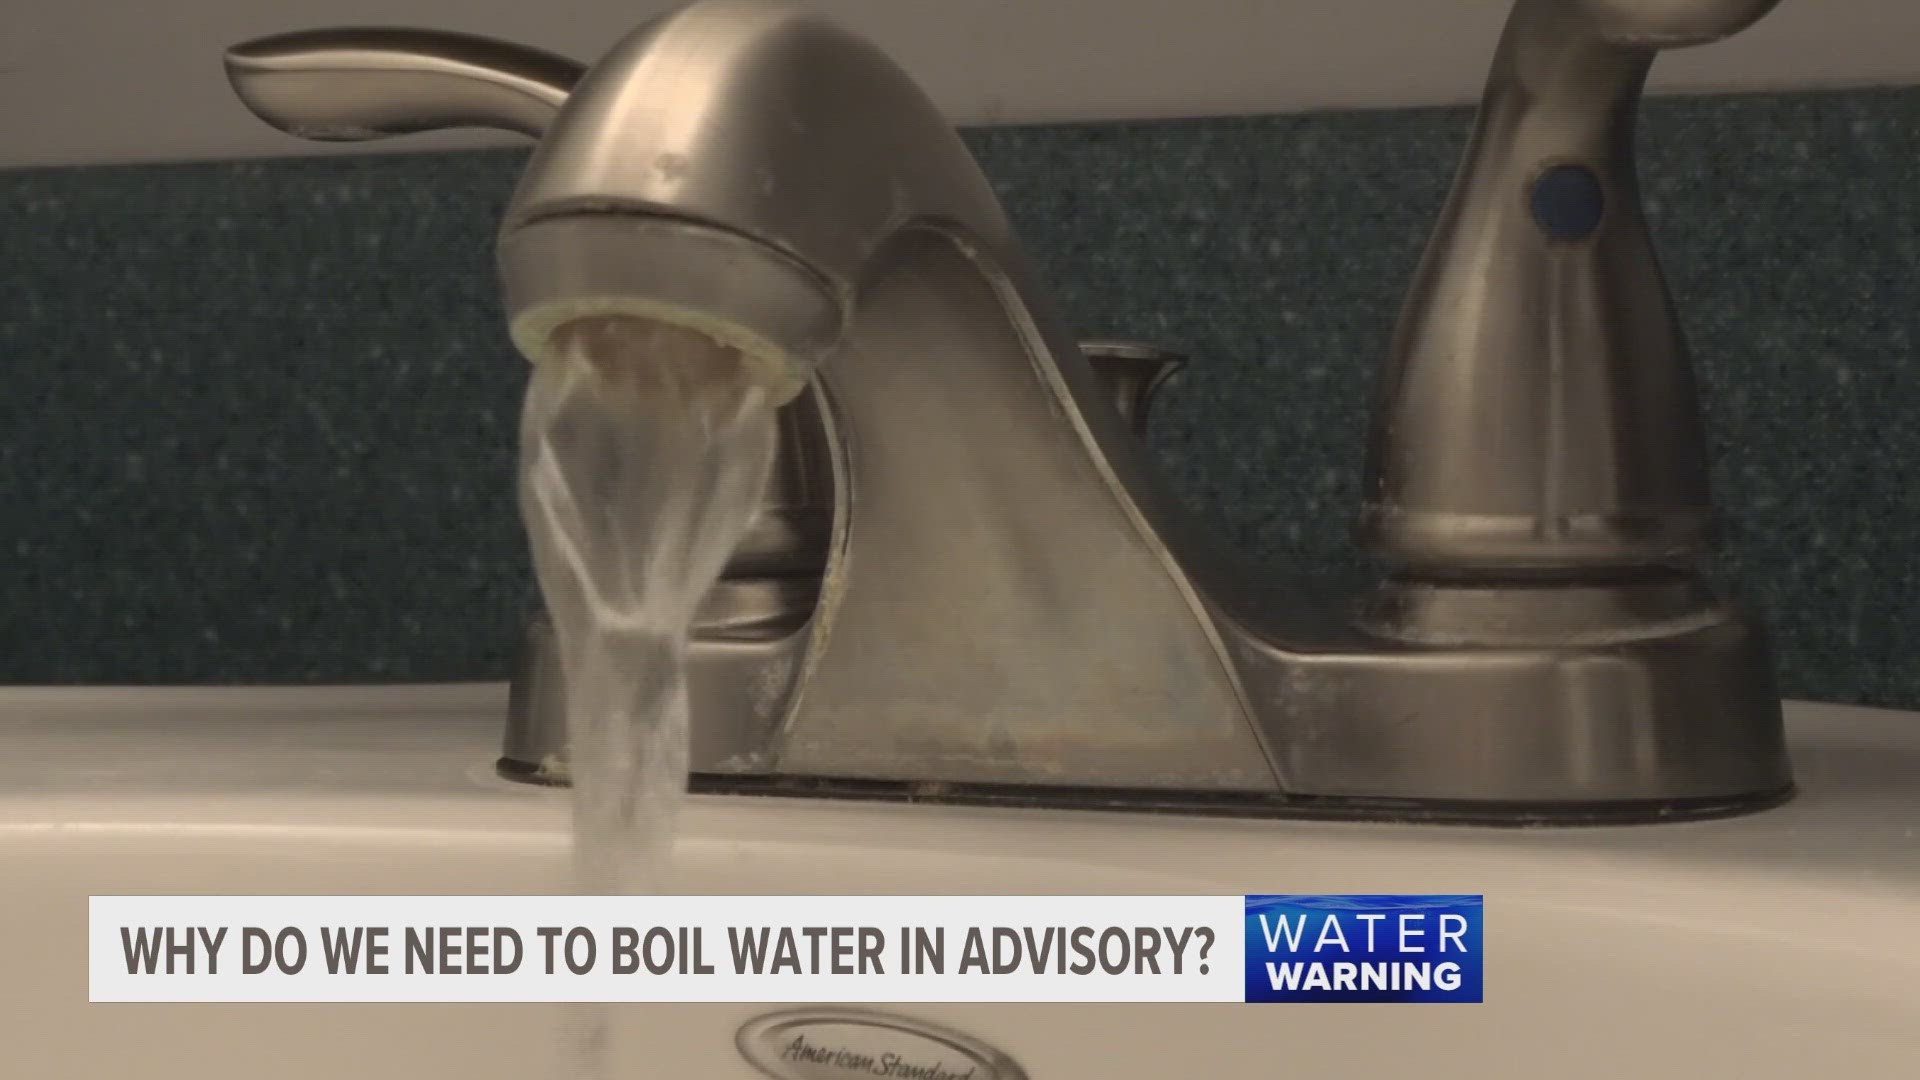 When a boil water advisory is issued, it means there is a chance that harmful bacteria could be inside your tap water.